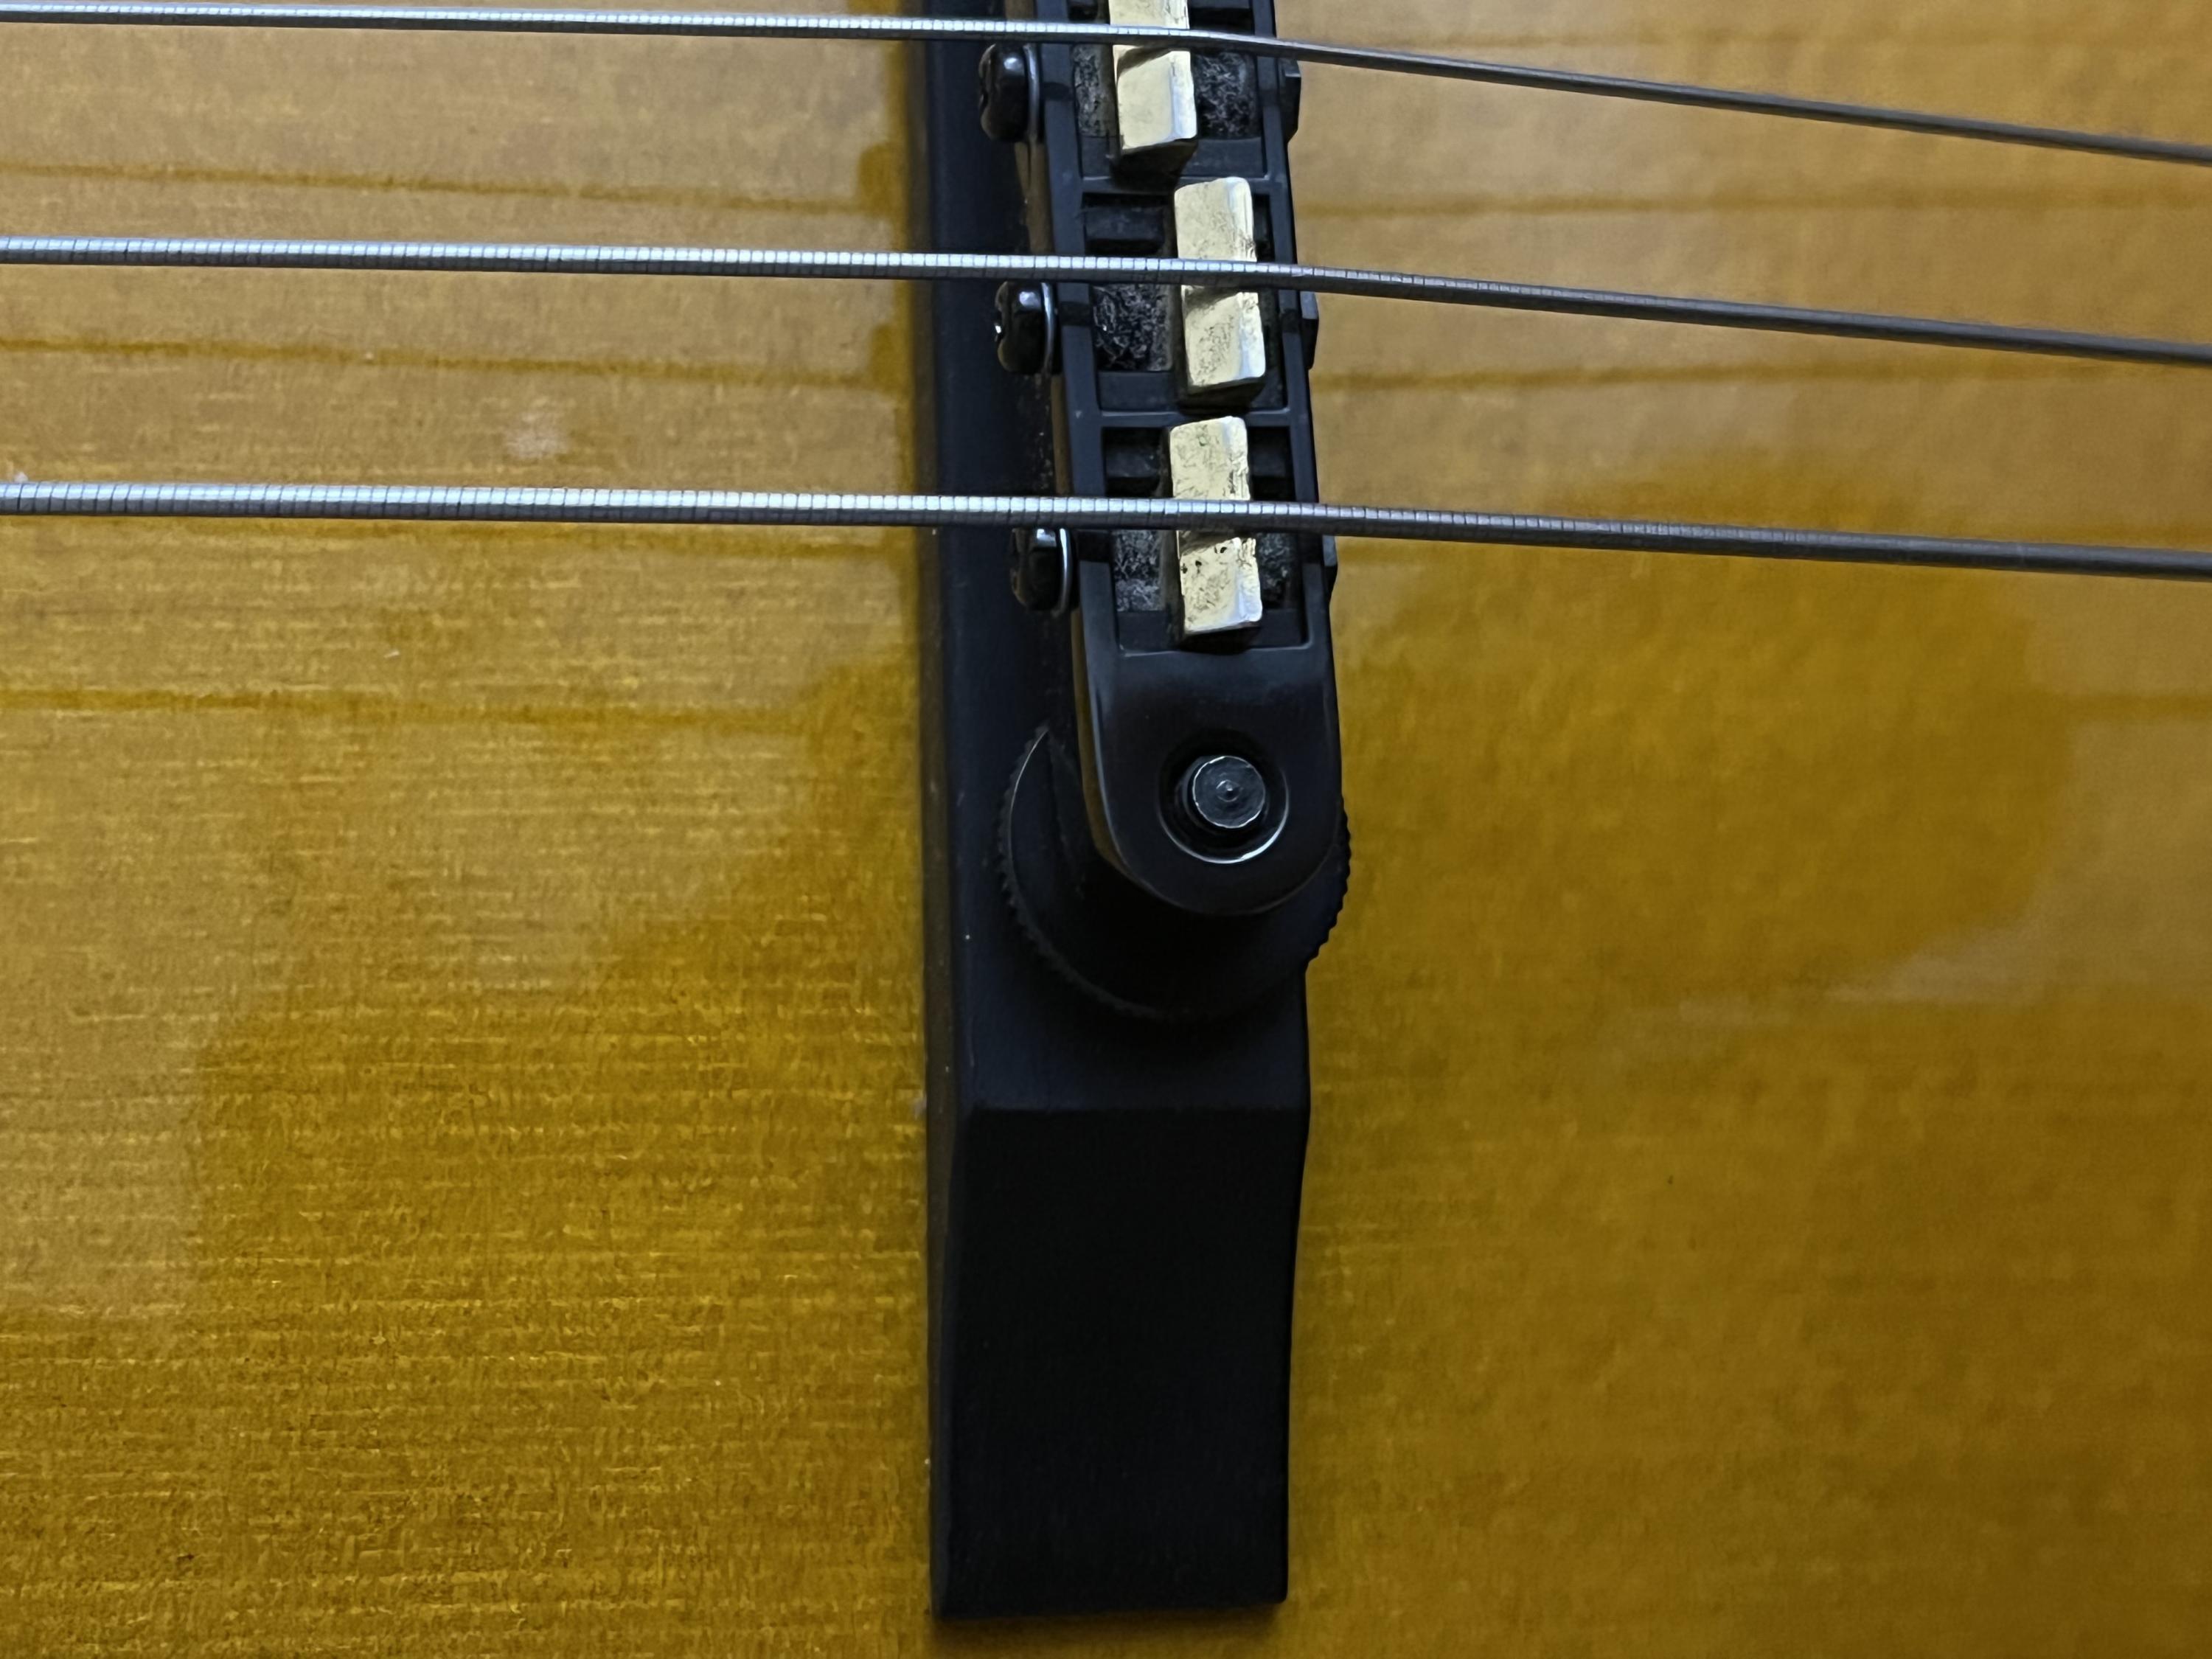 Alternate Picking - Difficulty on archtop-image_67204353-jpg